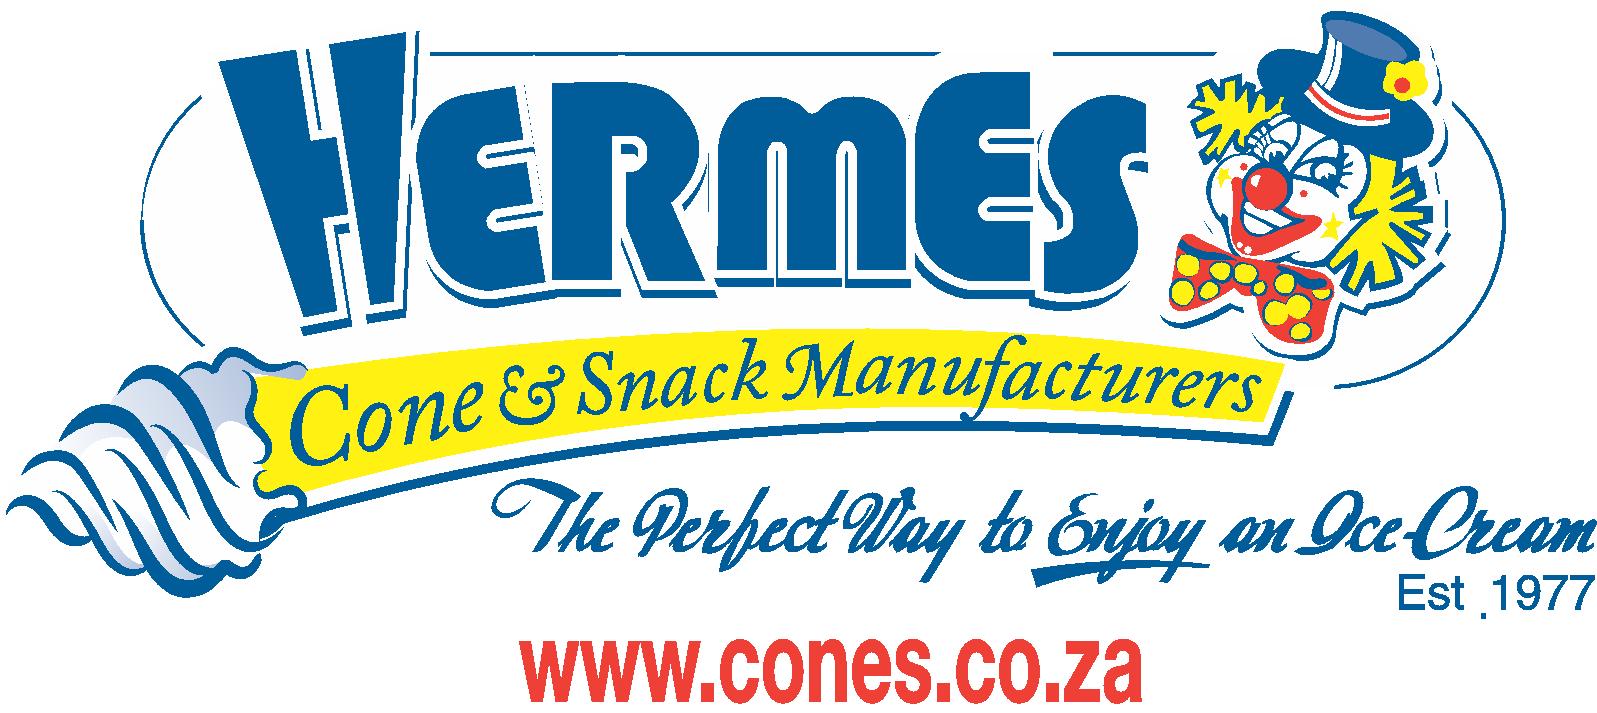 Hermes Cone & Snack Manufacturers logo